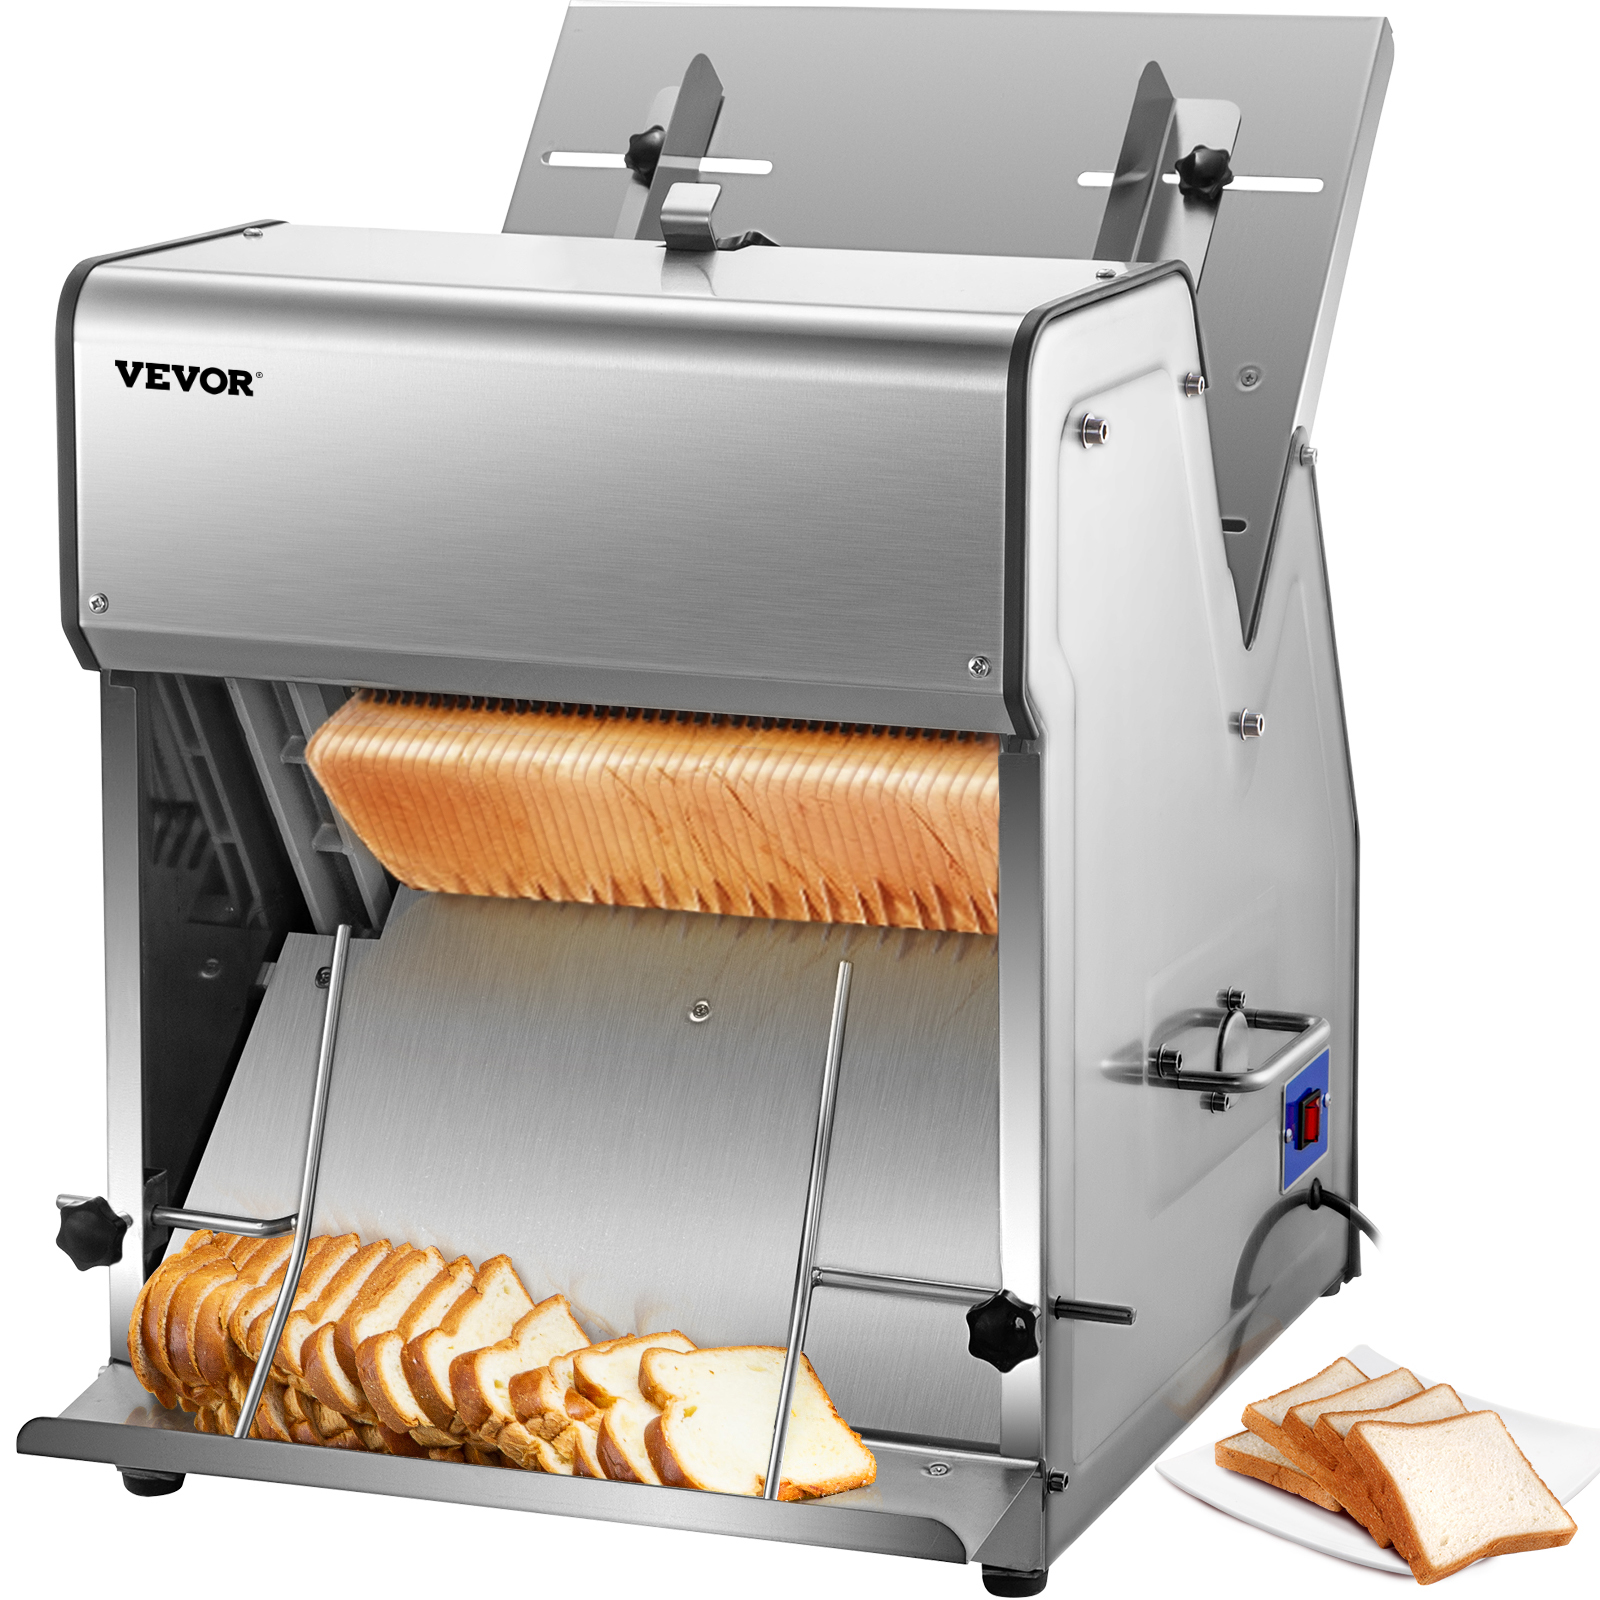 Vevor Commercial Toast Bread Slicer Electric Bread Cutting Machine 1/2" Slices от Vevor Many GEOs